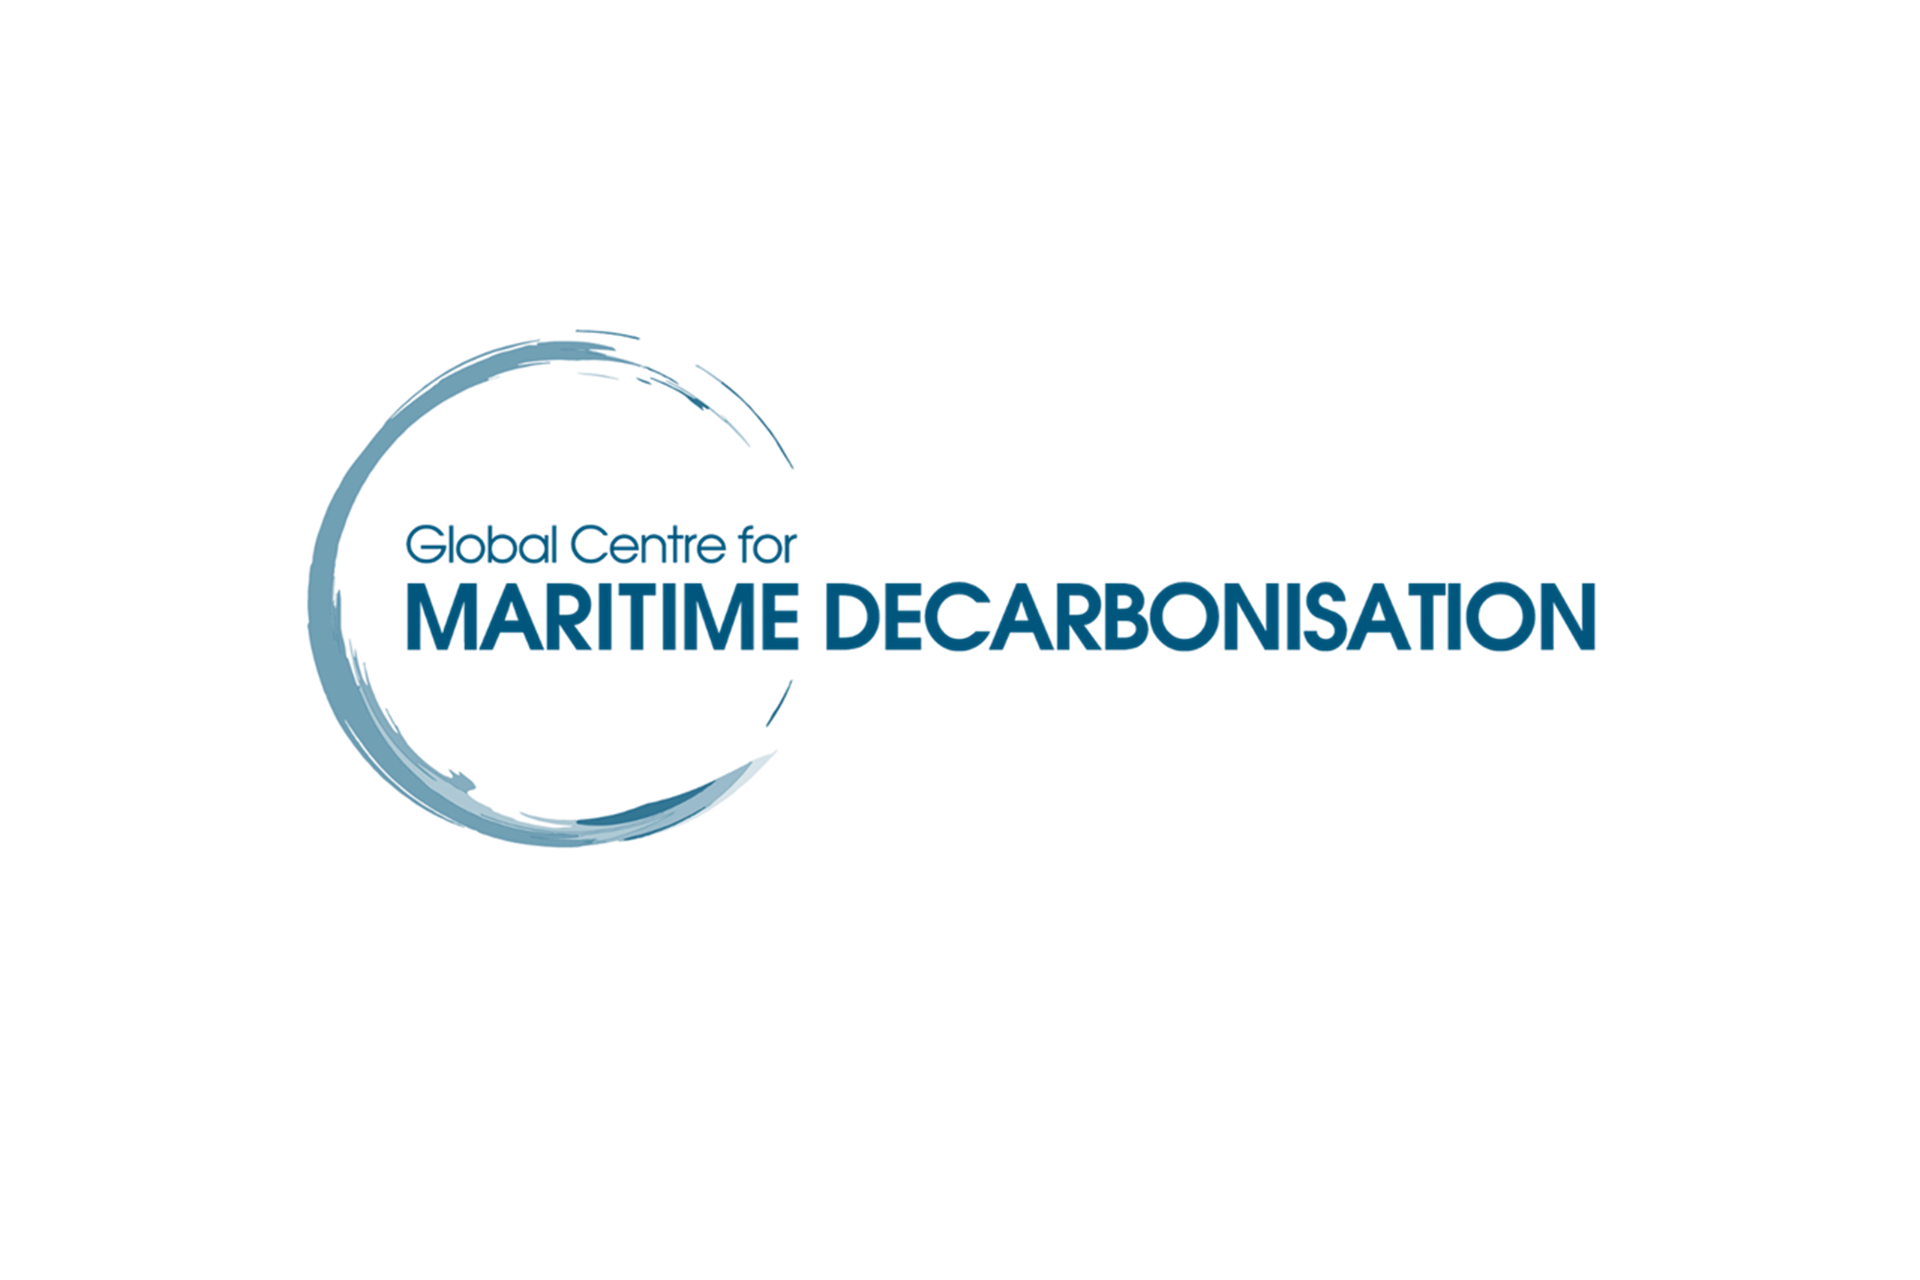 TotalEnergies Marine Fuels Collaborates in GCMD Trial to Enable Traceability & 
Emissions Abatement Assurance of Marine Biofuels